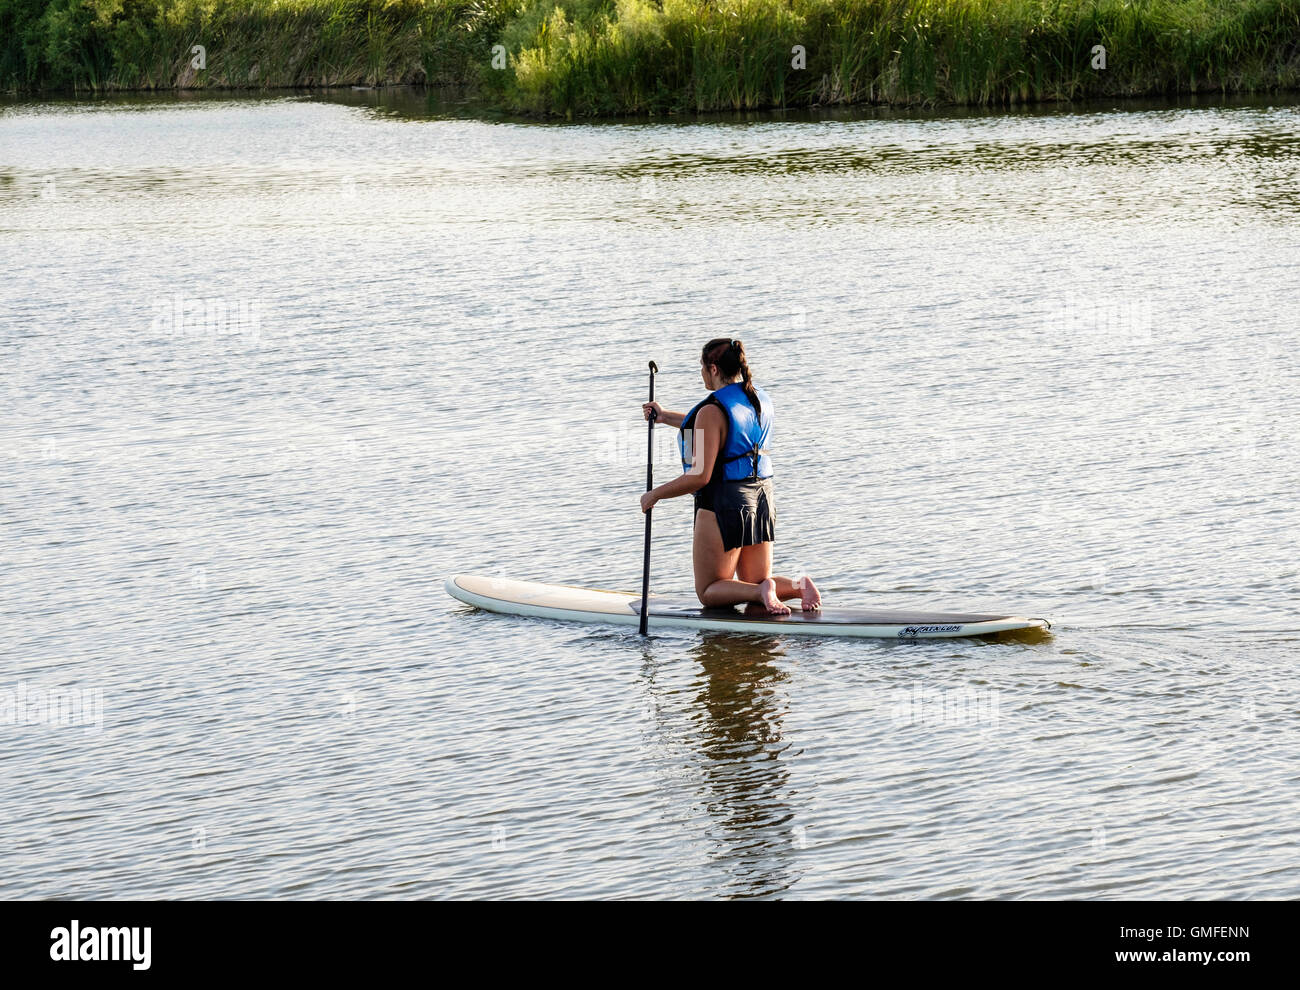 A Caucasian woman kneels and paddles on a paddleboard on the North Canadian river near Overholser lake in Oklahoma, USA. Stock Photo